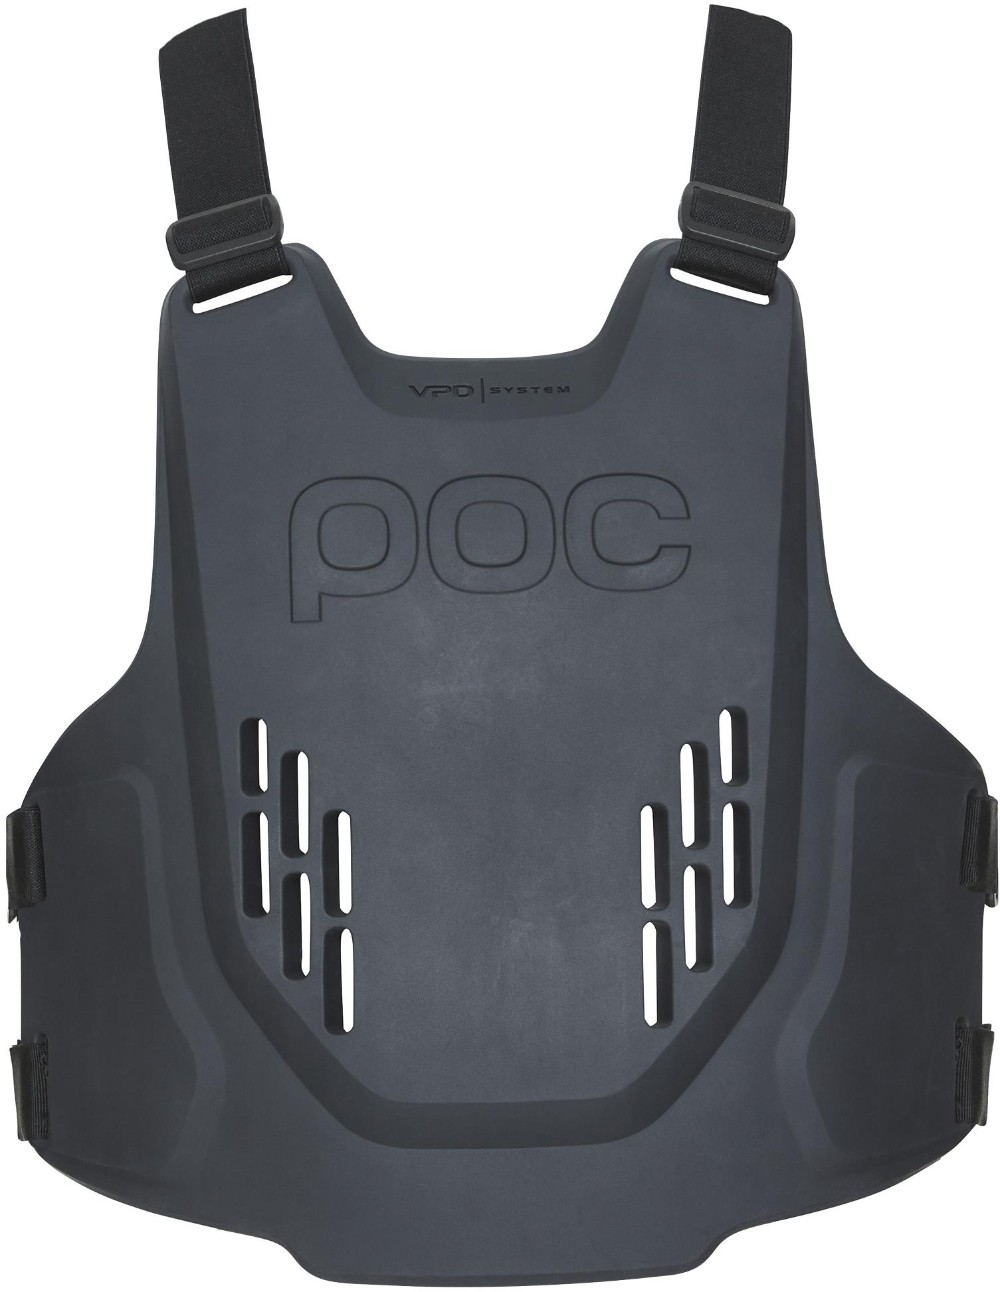 VPD System Chest Protector image 0